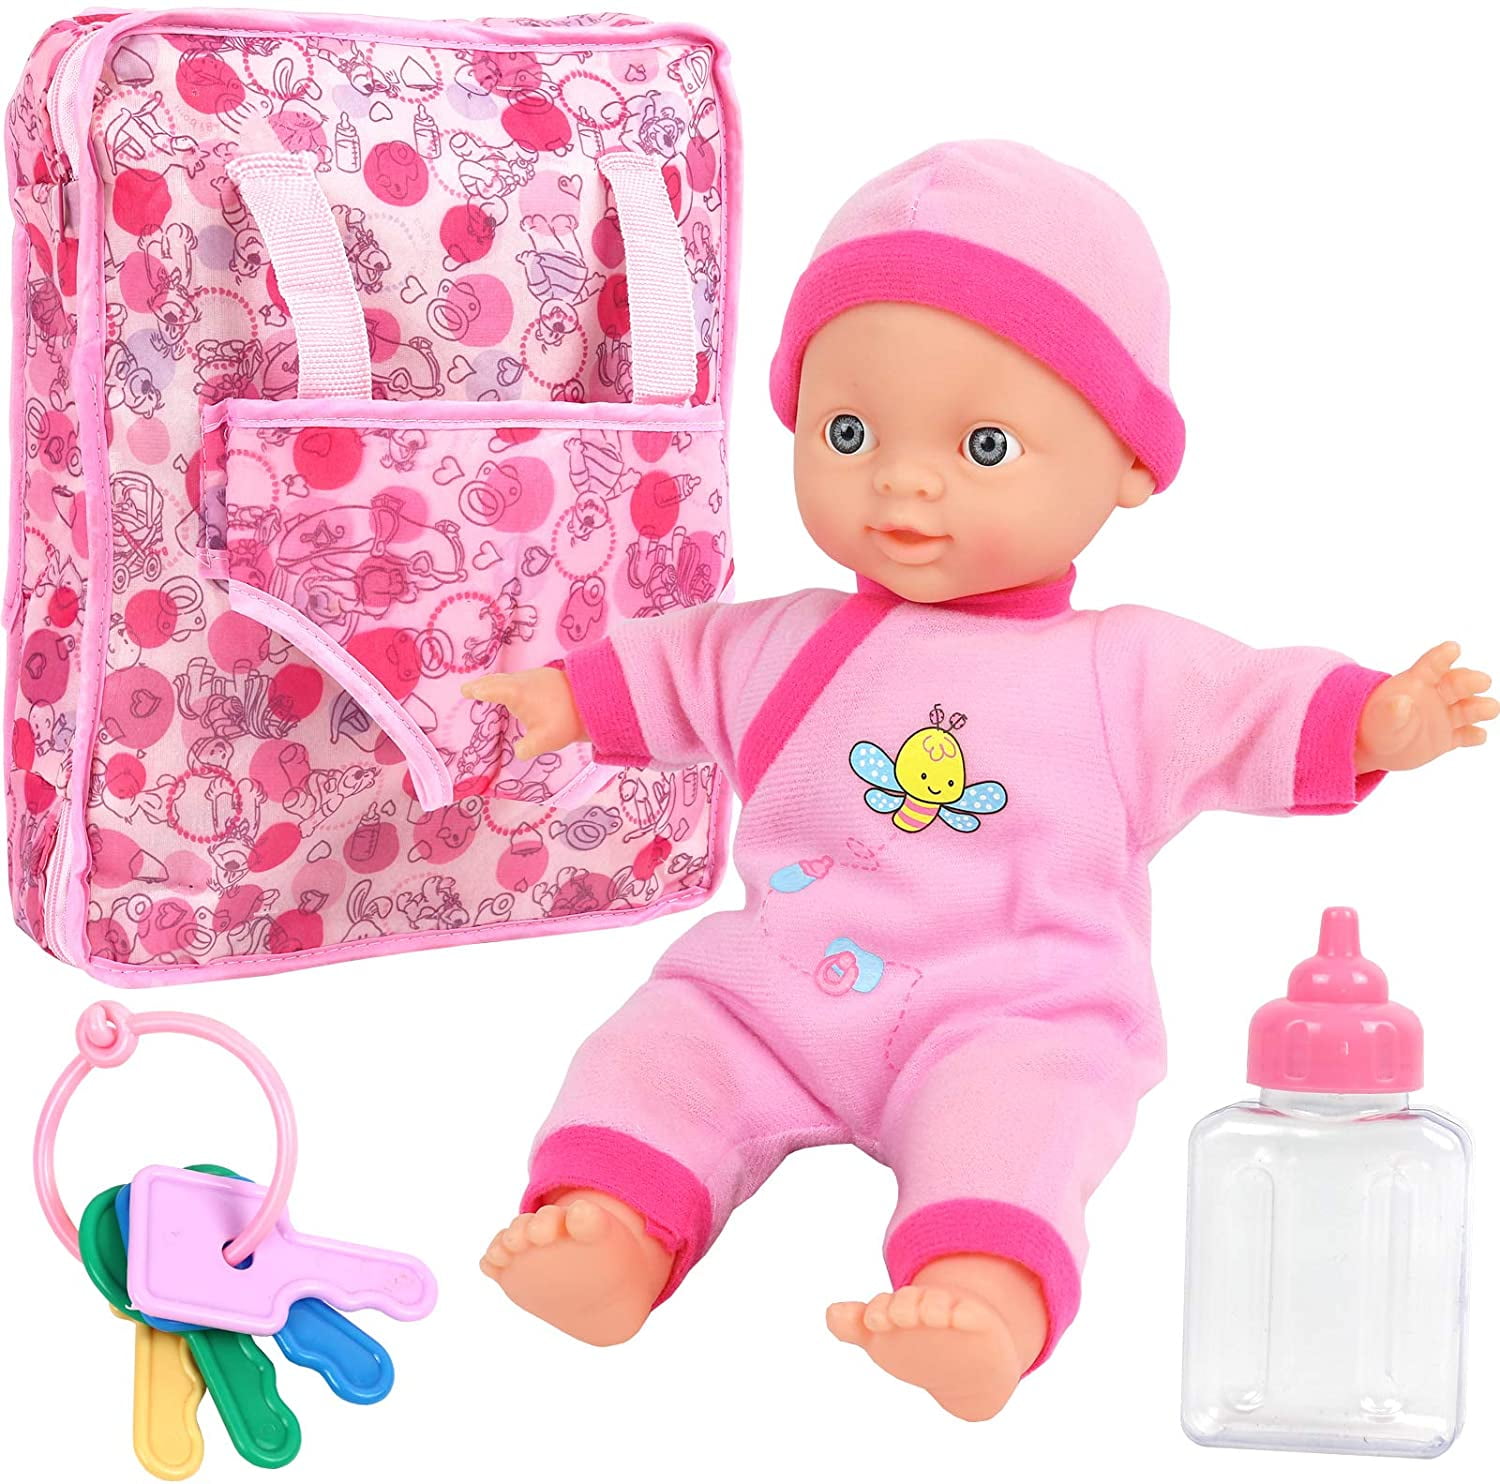 Chad Valley Tiny Treasures Baby Doll Carrier For Dolls Girls Play Kids Carry 